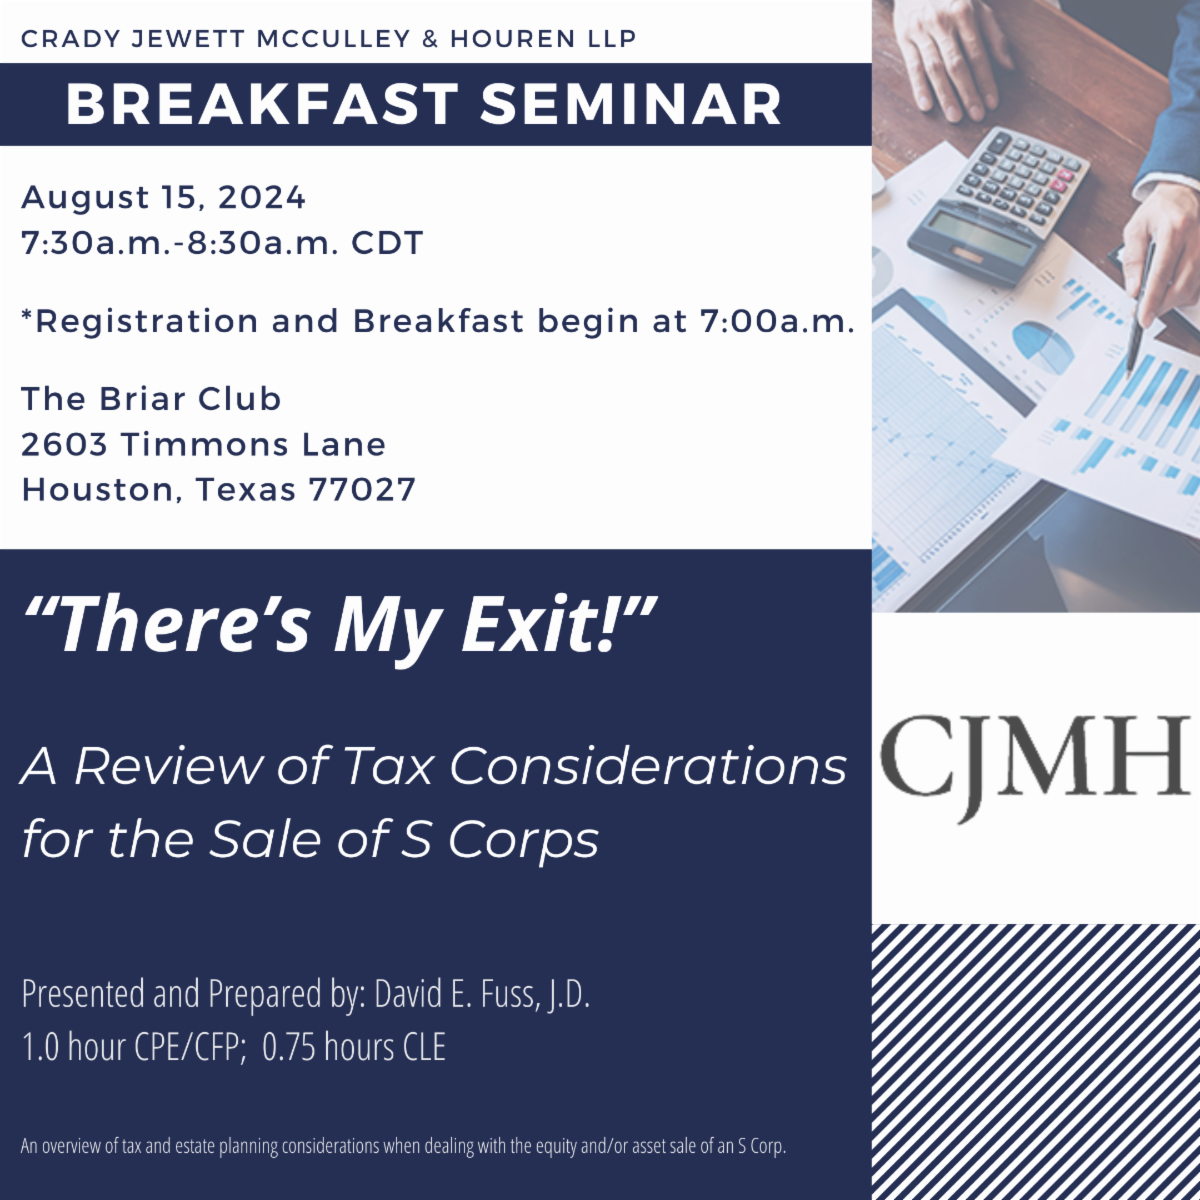 August Breakfast Seminar – “There’s My Exit!”